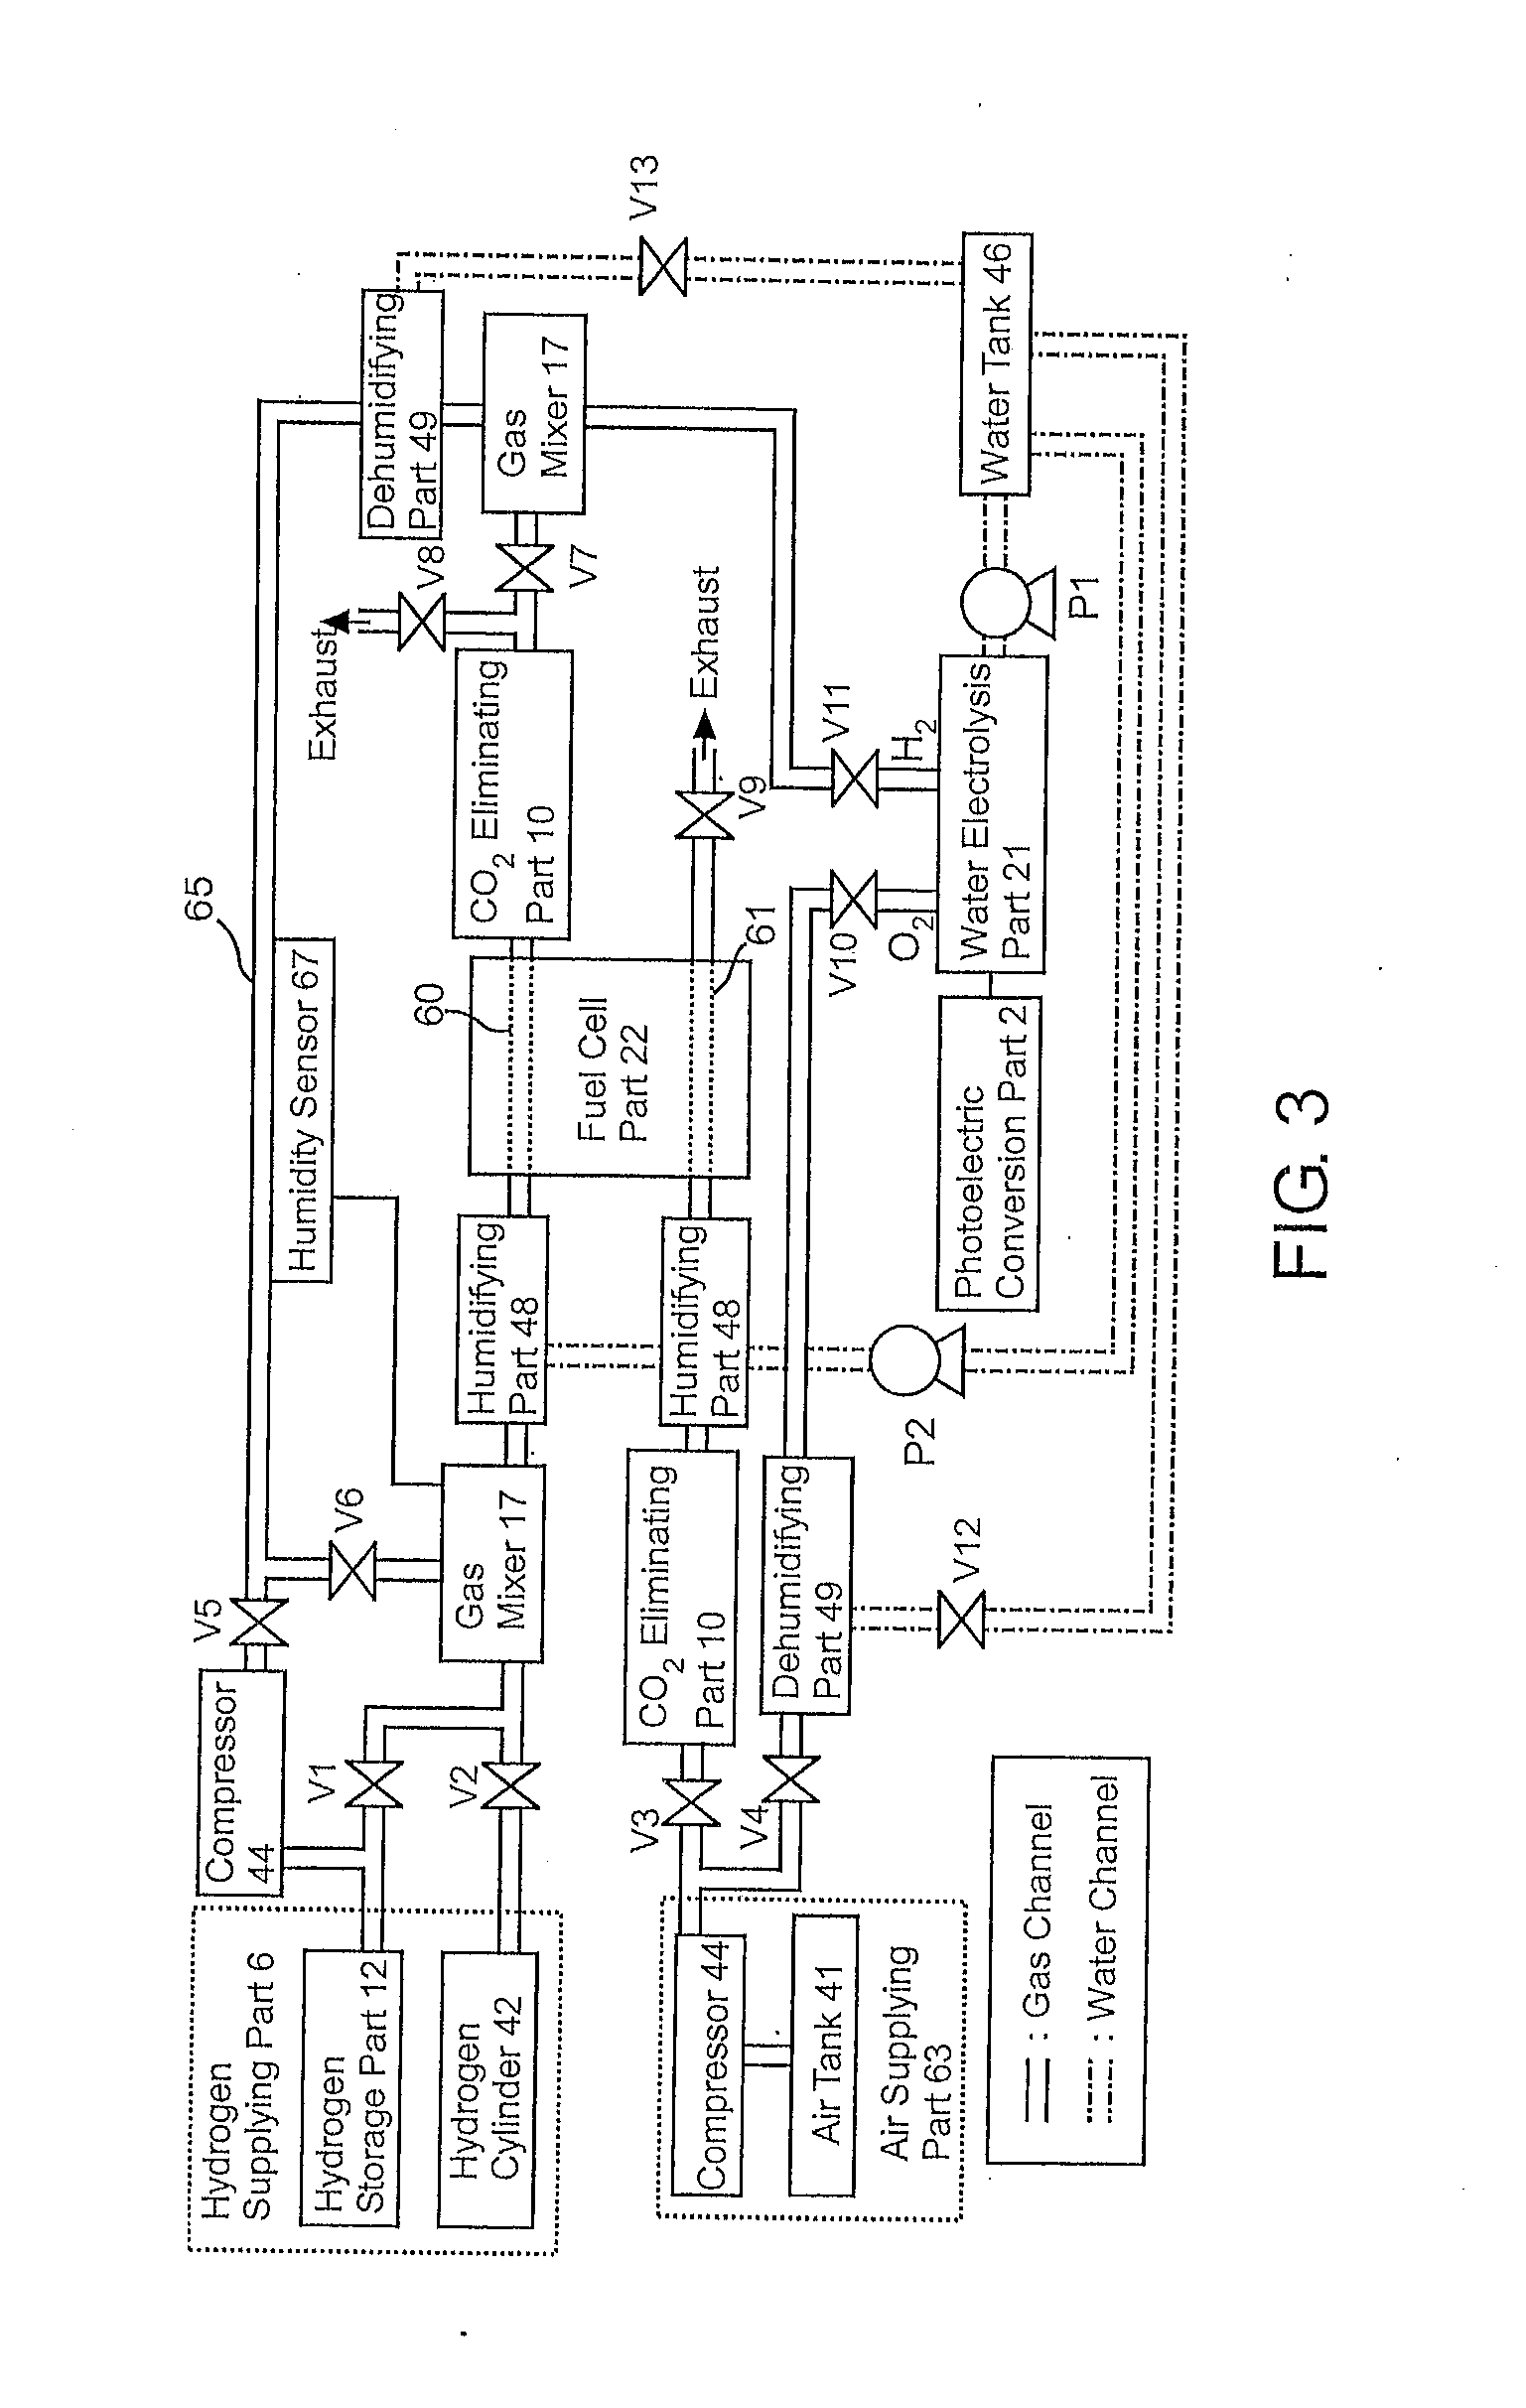 Anion-exchange-membrane type of fuel-cell-system